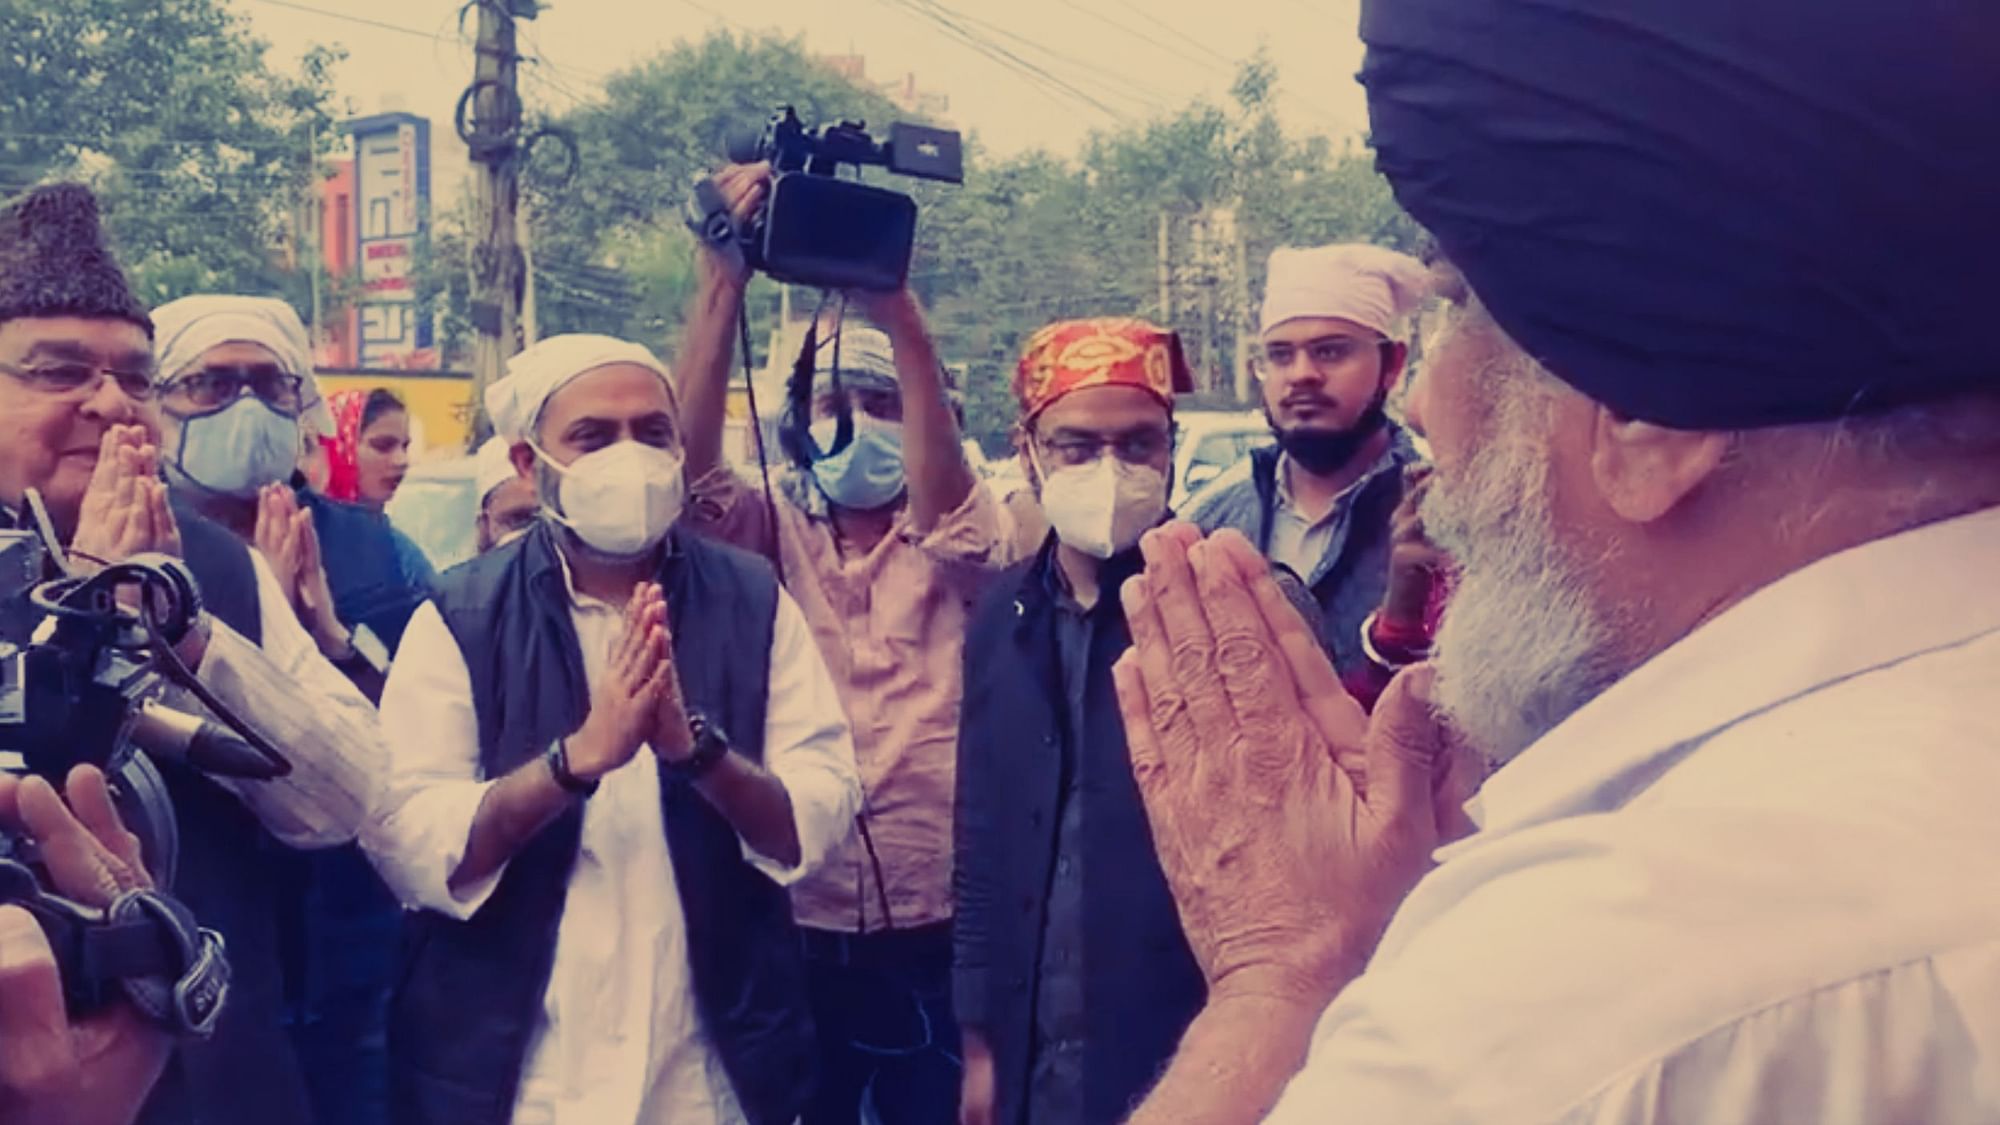 <div class="paragraphs"><p>Members of the Gurgaon Nagrik Ekta Manch, Mohd Adeeb and Altaf Ahmad, along with others were welcomed by Daya Singh, member of the Gurudwara Committee, as they arrived to wish Sikhs on Gurpurab.</p></div>